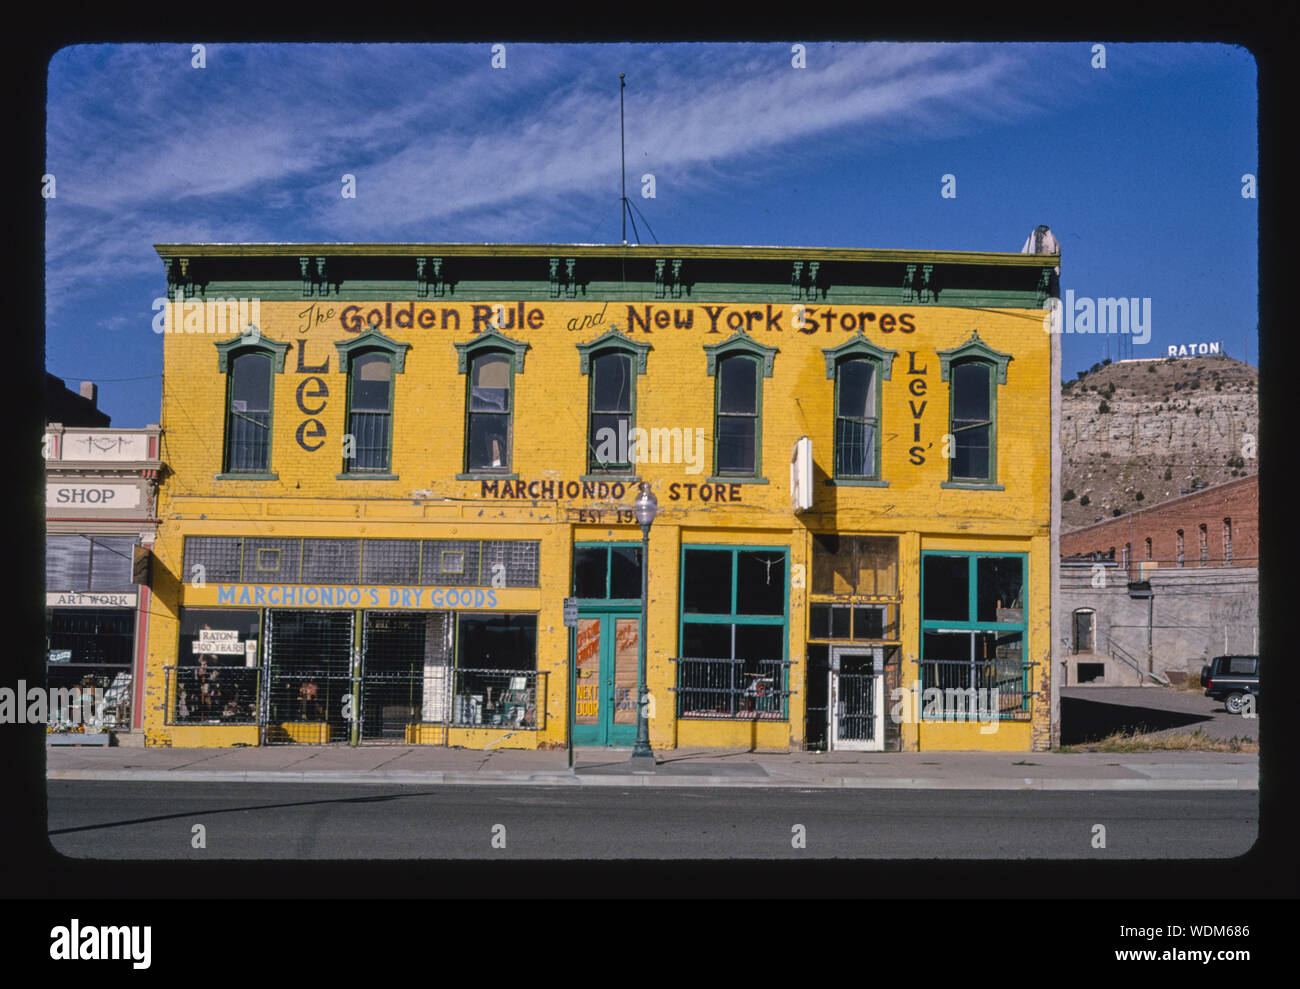 Golden Rule and New York Stores, South 1st Street, Raton, New Mexico Stock Photo